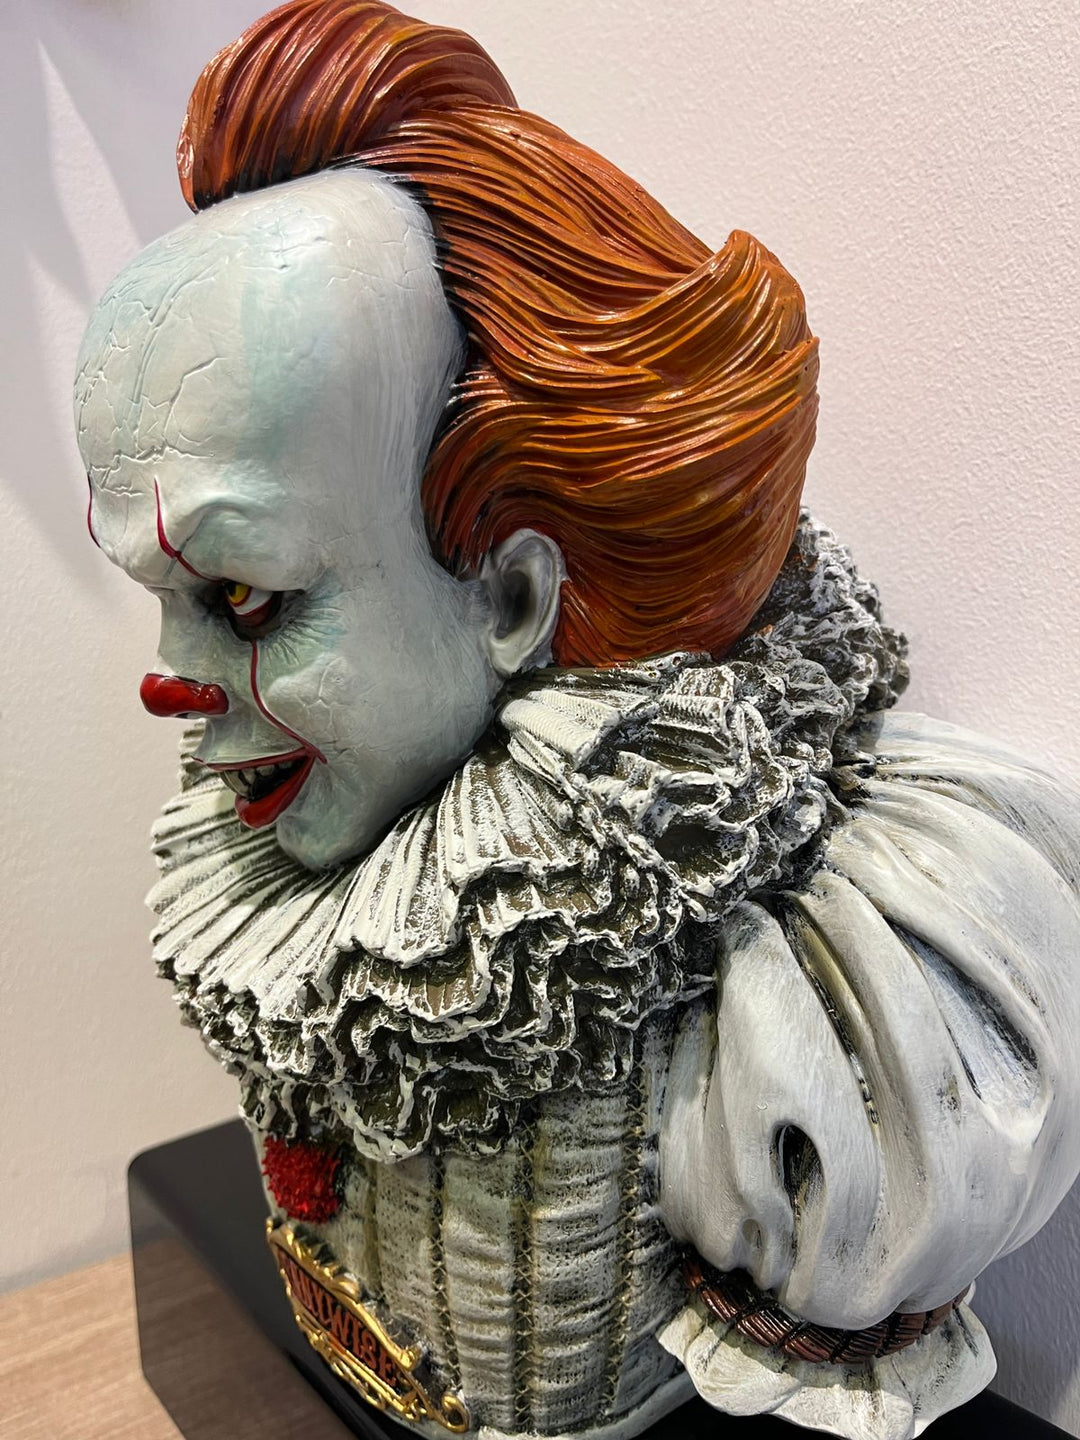 IT Pennywise Bust, Pennywise the Clown, Pennywise The Dancing Clown, Robert Gray